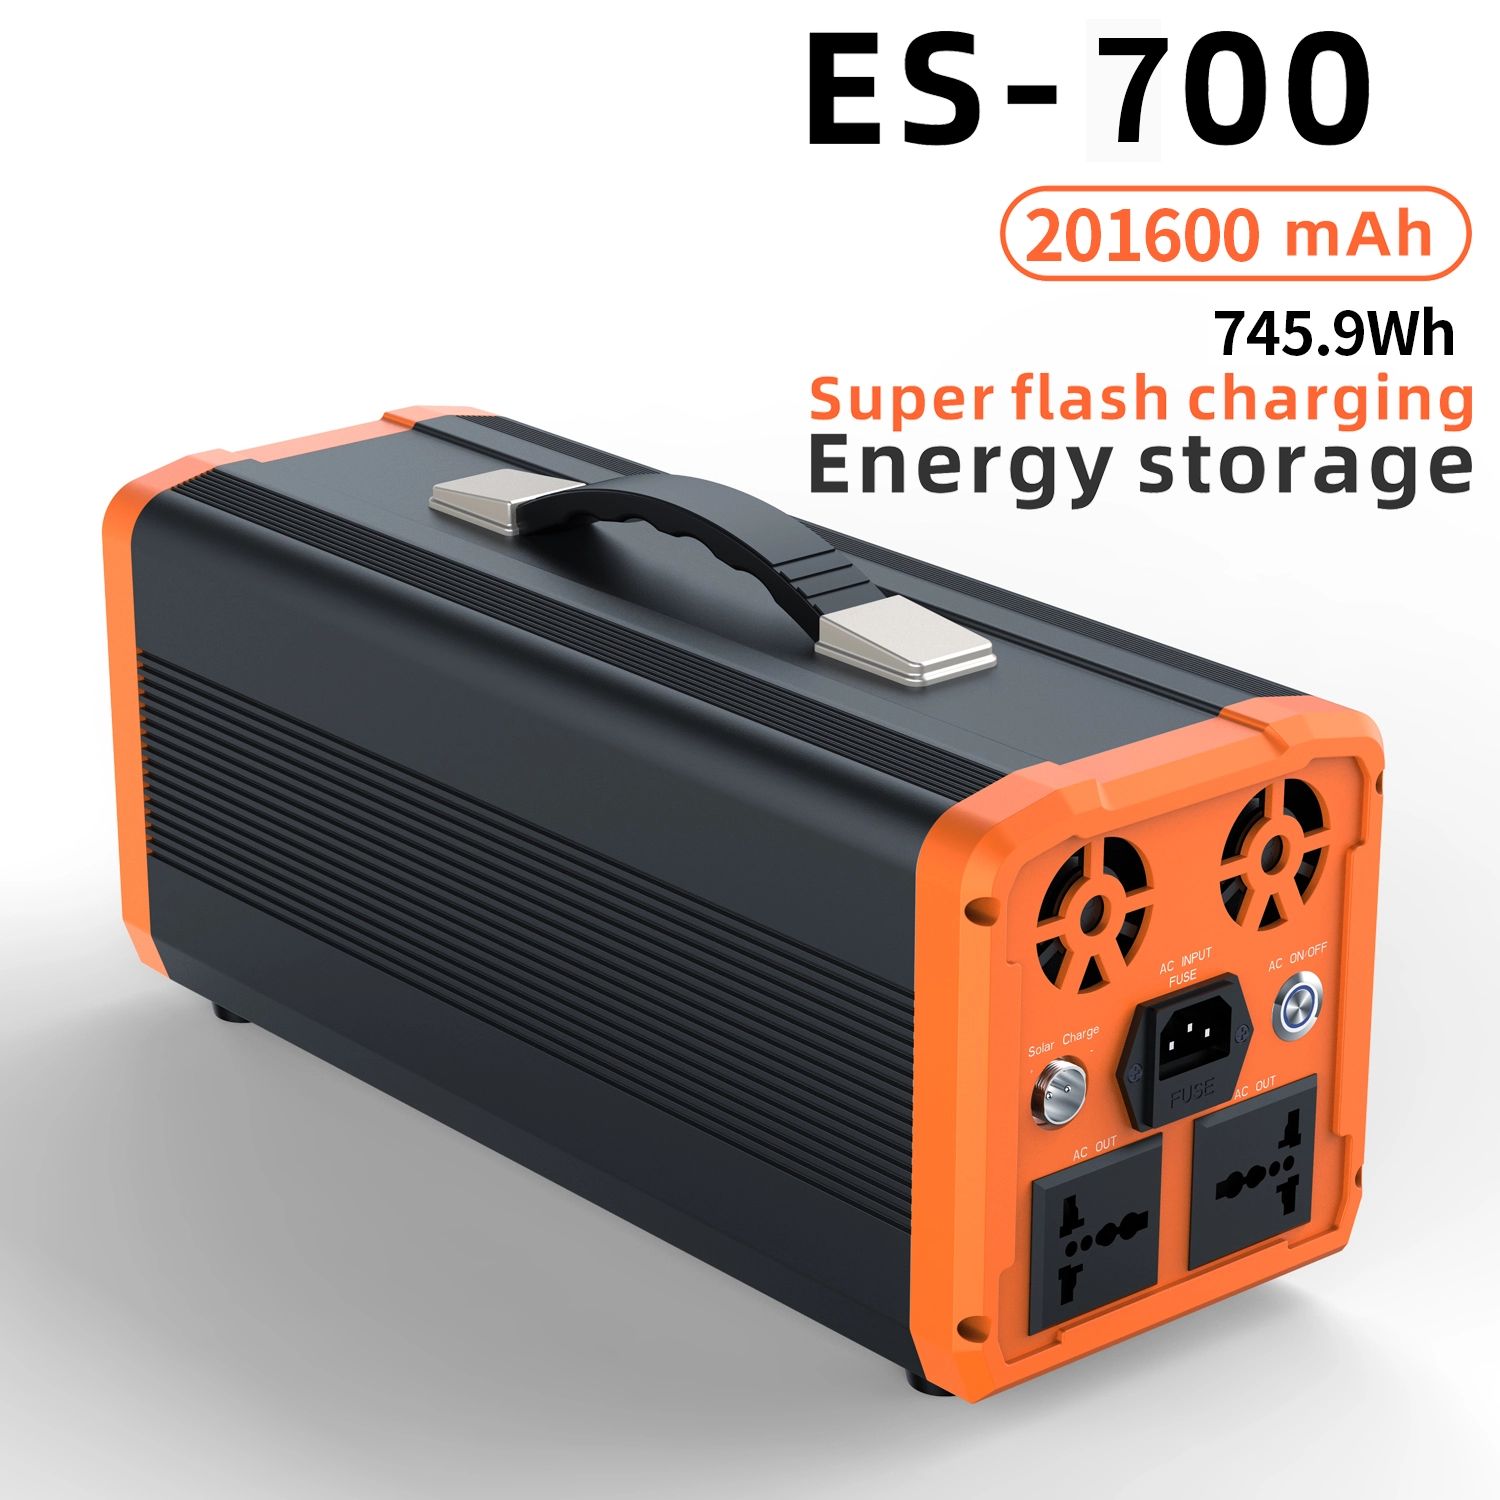 ES-700 Energy Storage Power solar inverter for outdoor use with lithium battery